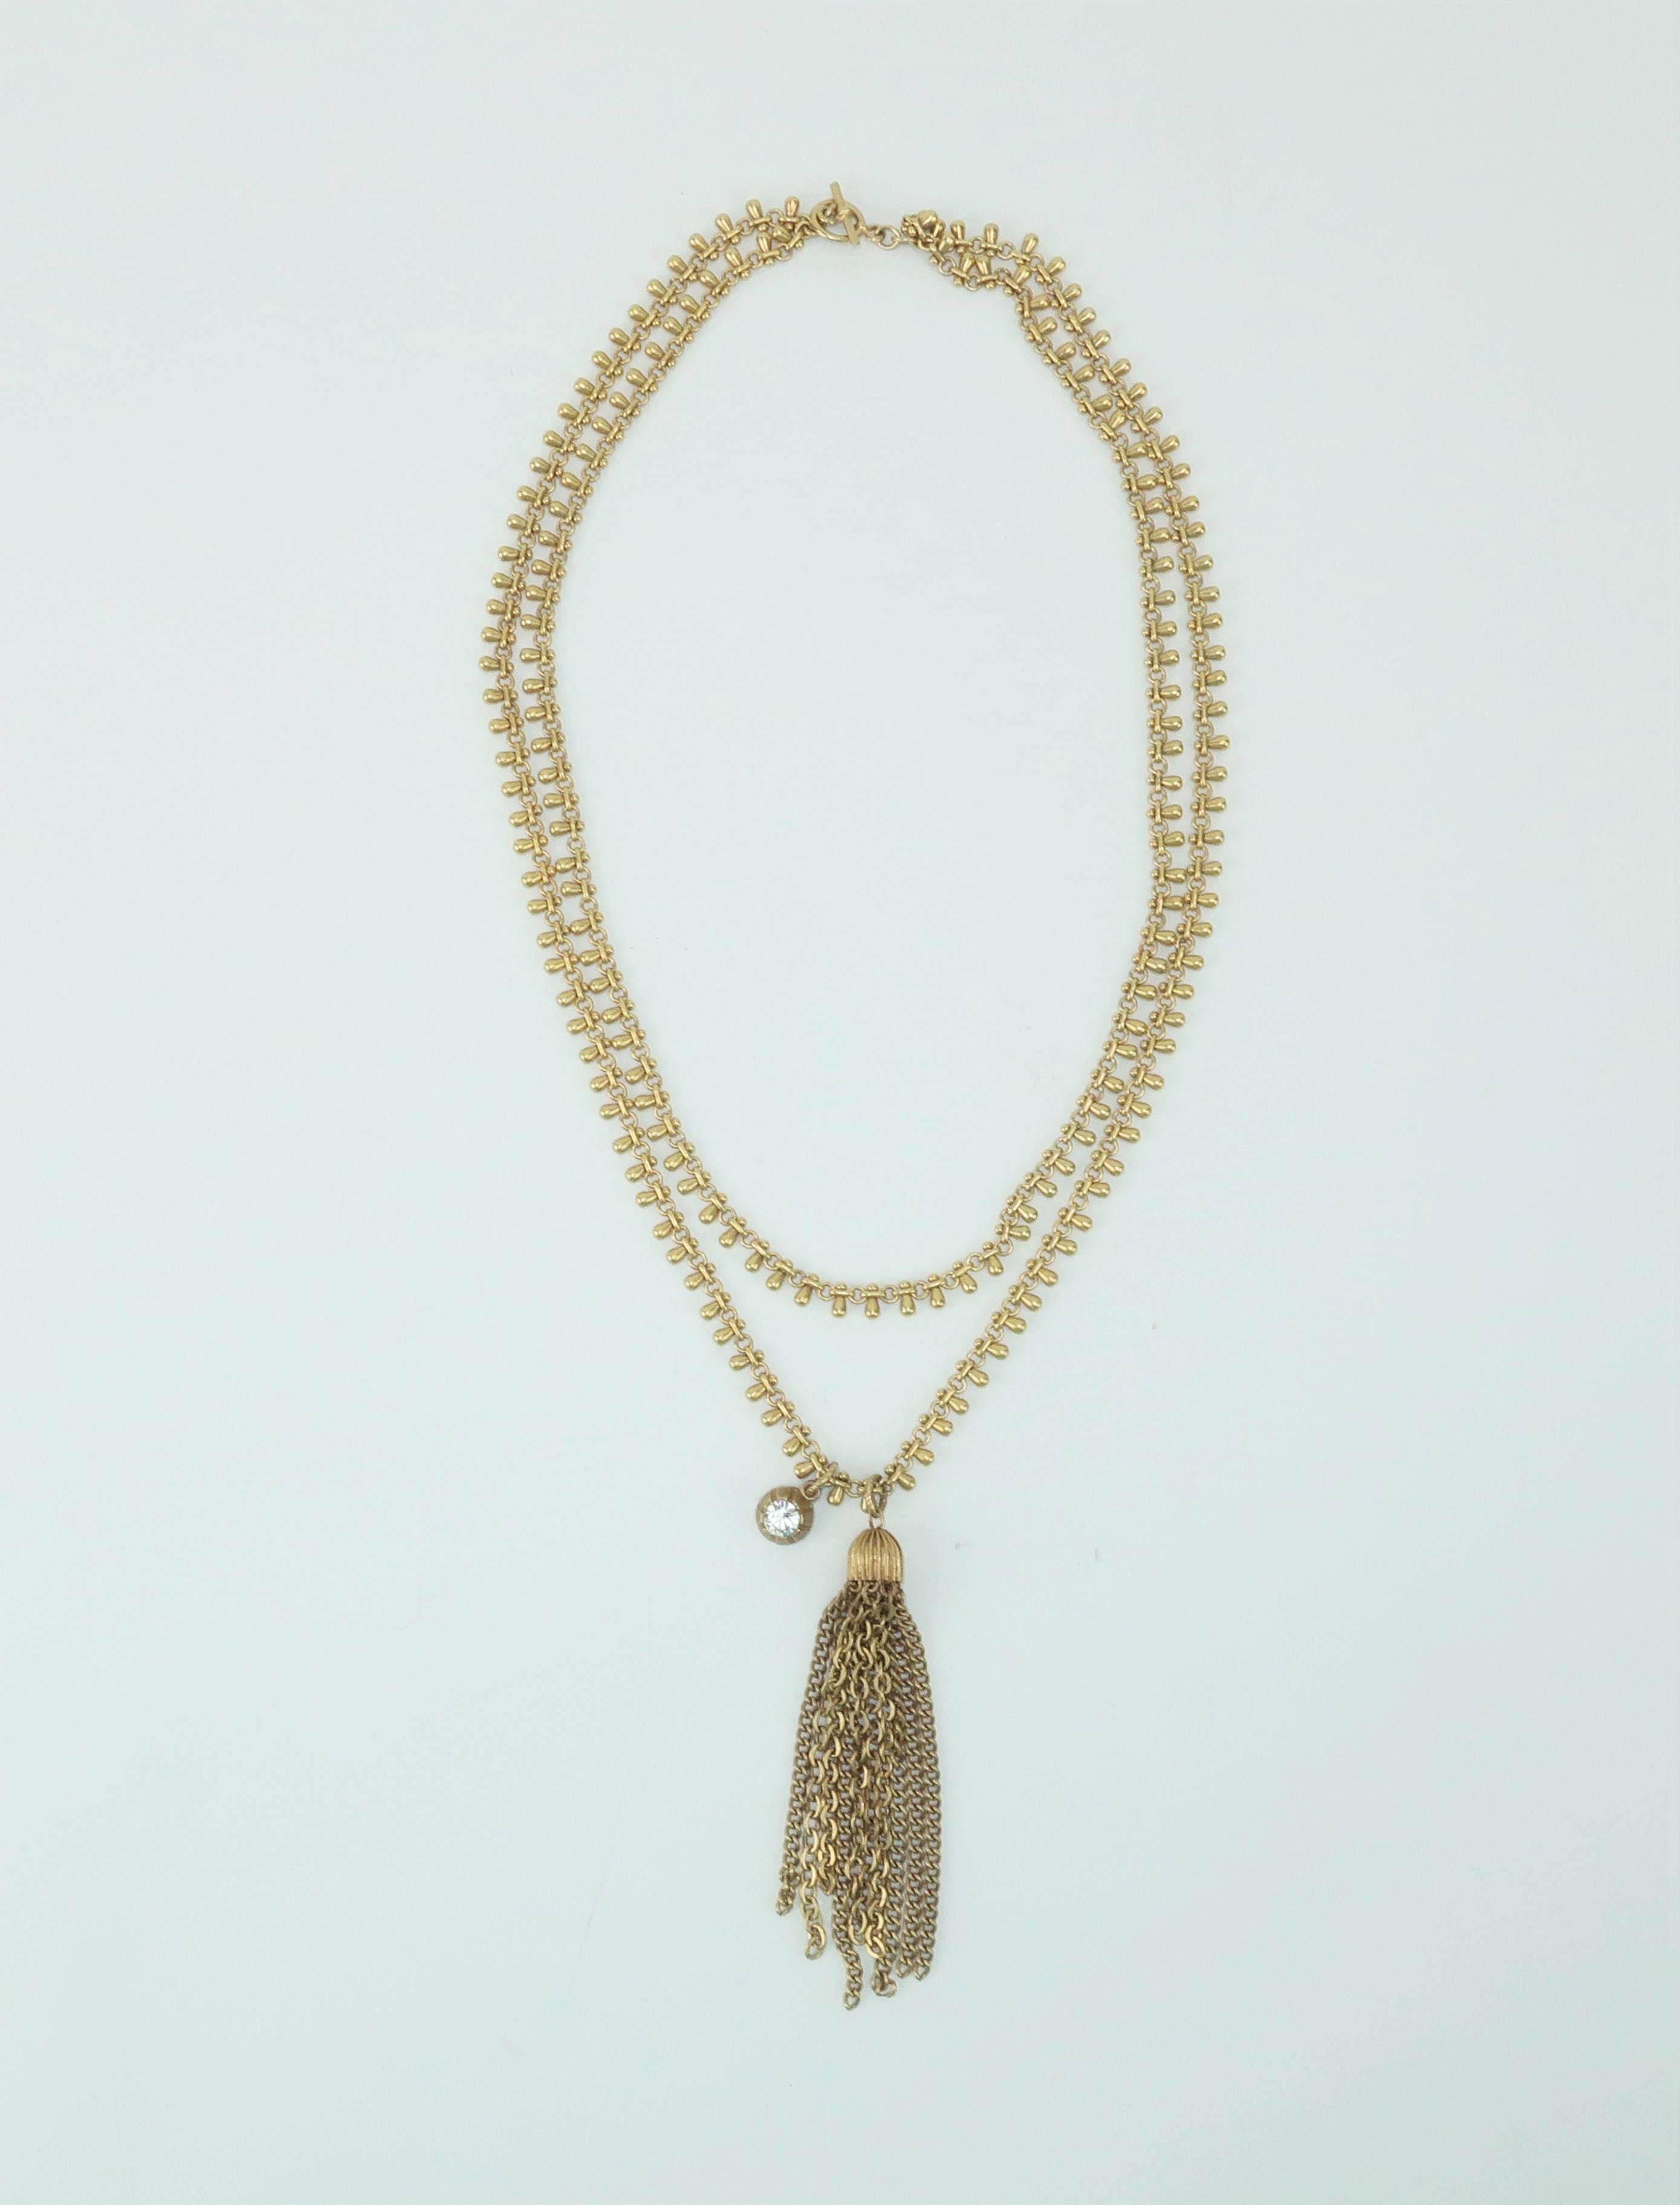 This vintage double stranded gold tone chain necklace begs for a closer look.  Each chain is formed by detailed articulated beading and serves to suspend a gold chain tassel and a single off-center crystal rhinestone pendant.  The overall effect of